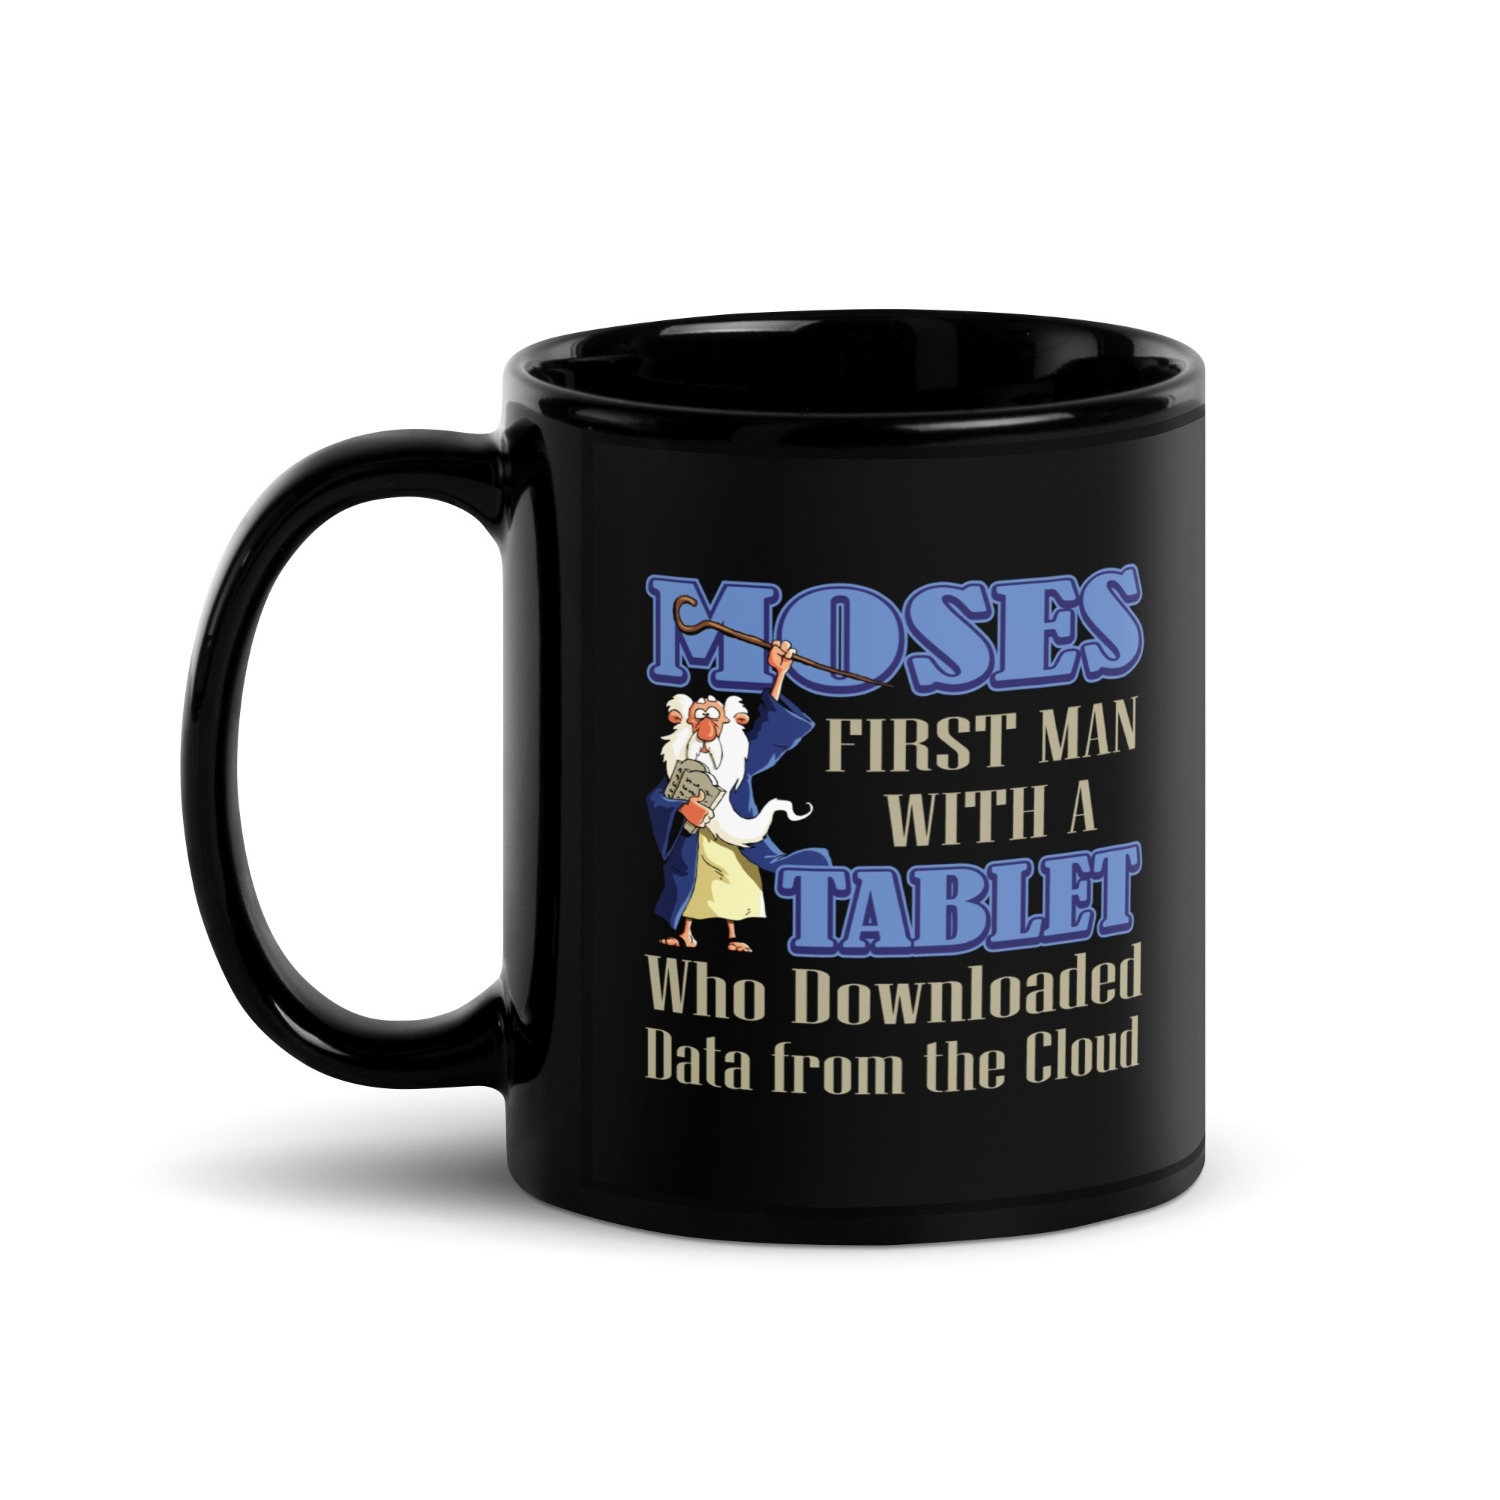 Moses the First Man To Download from the Cloud - Black Glossy Mug - 1